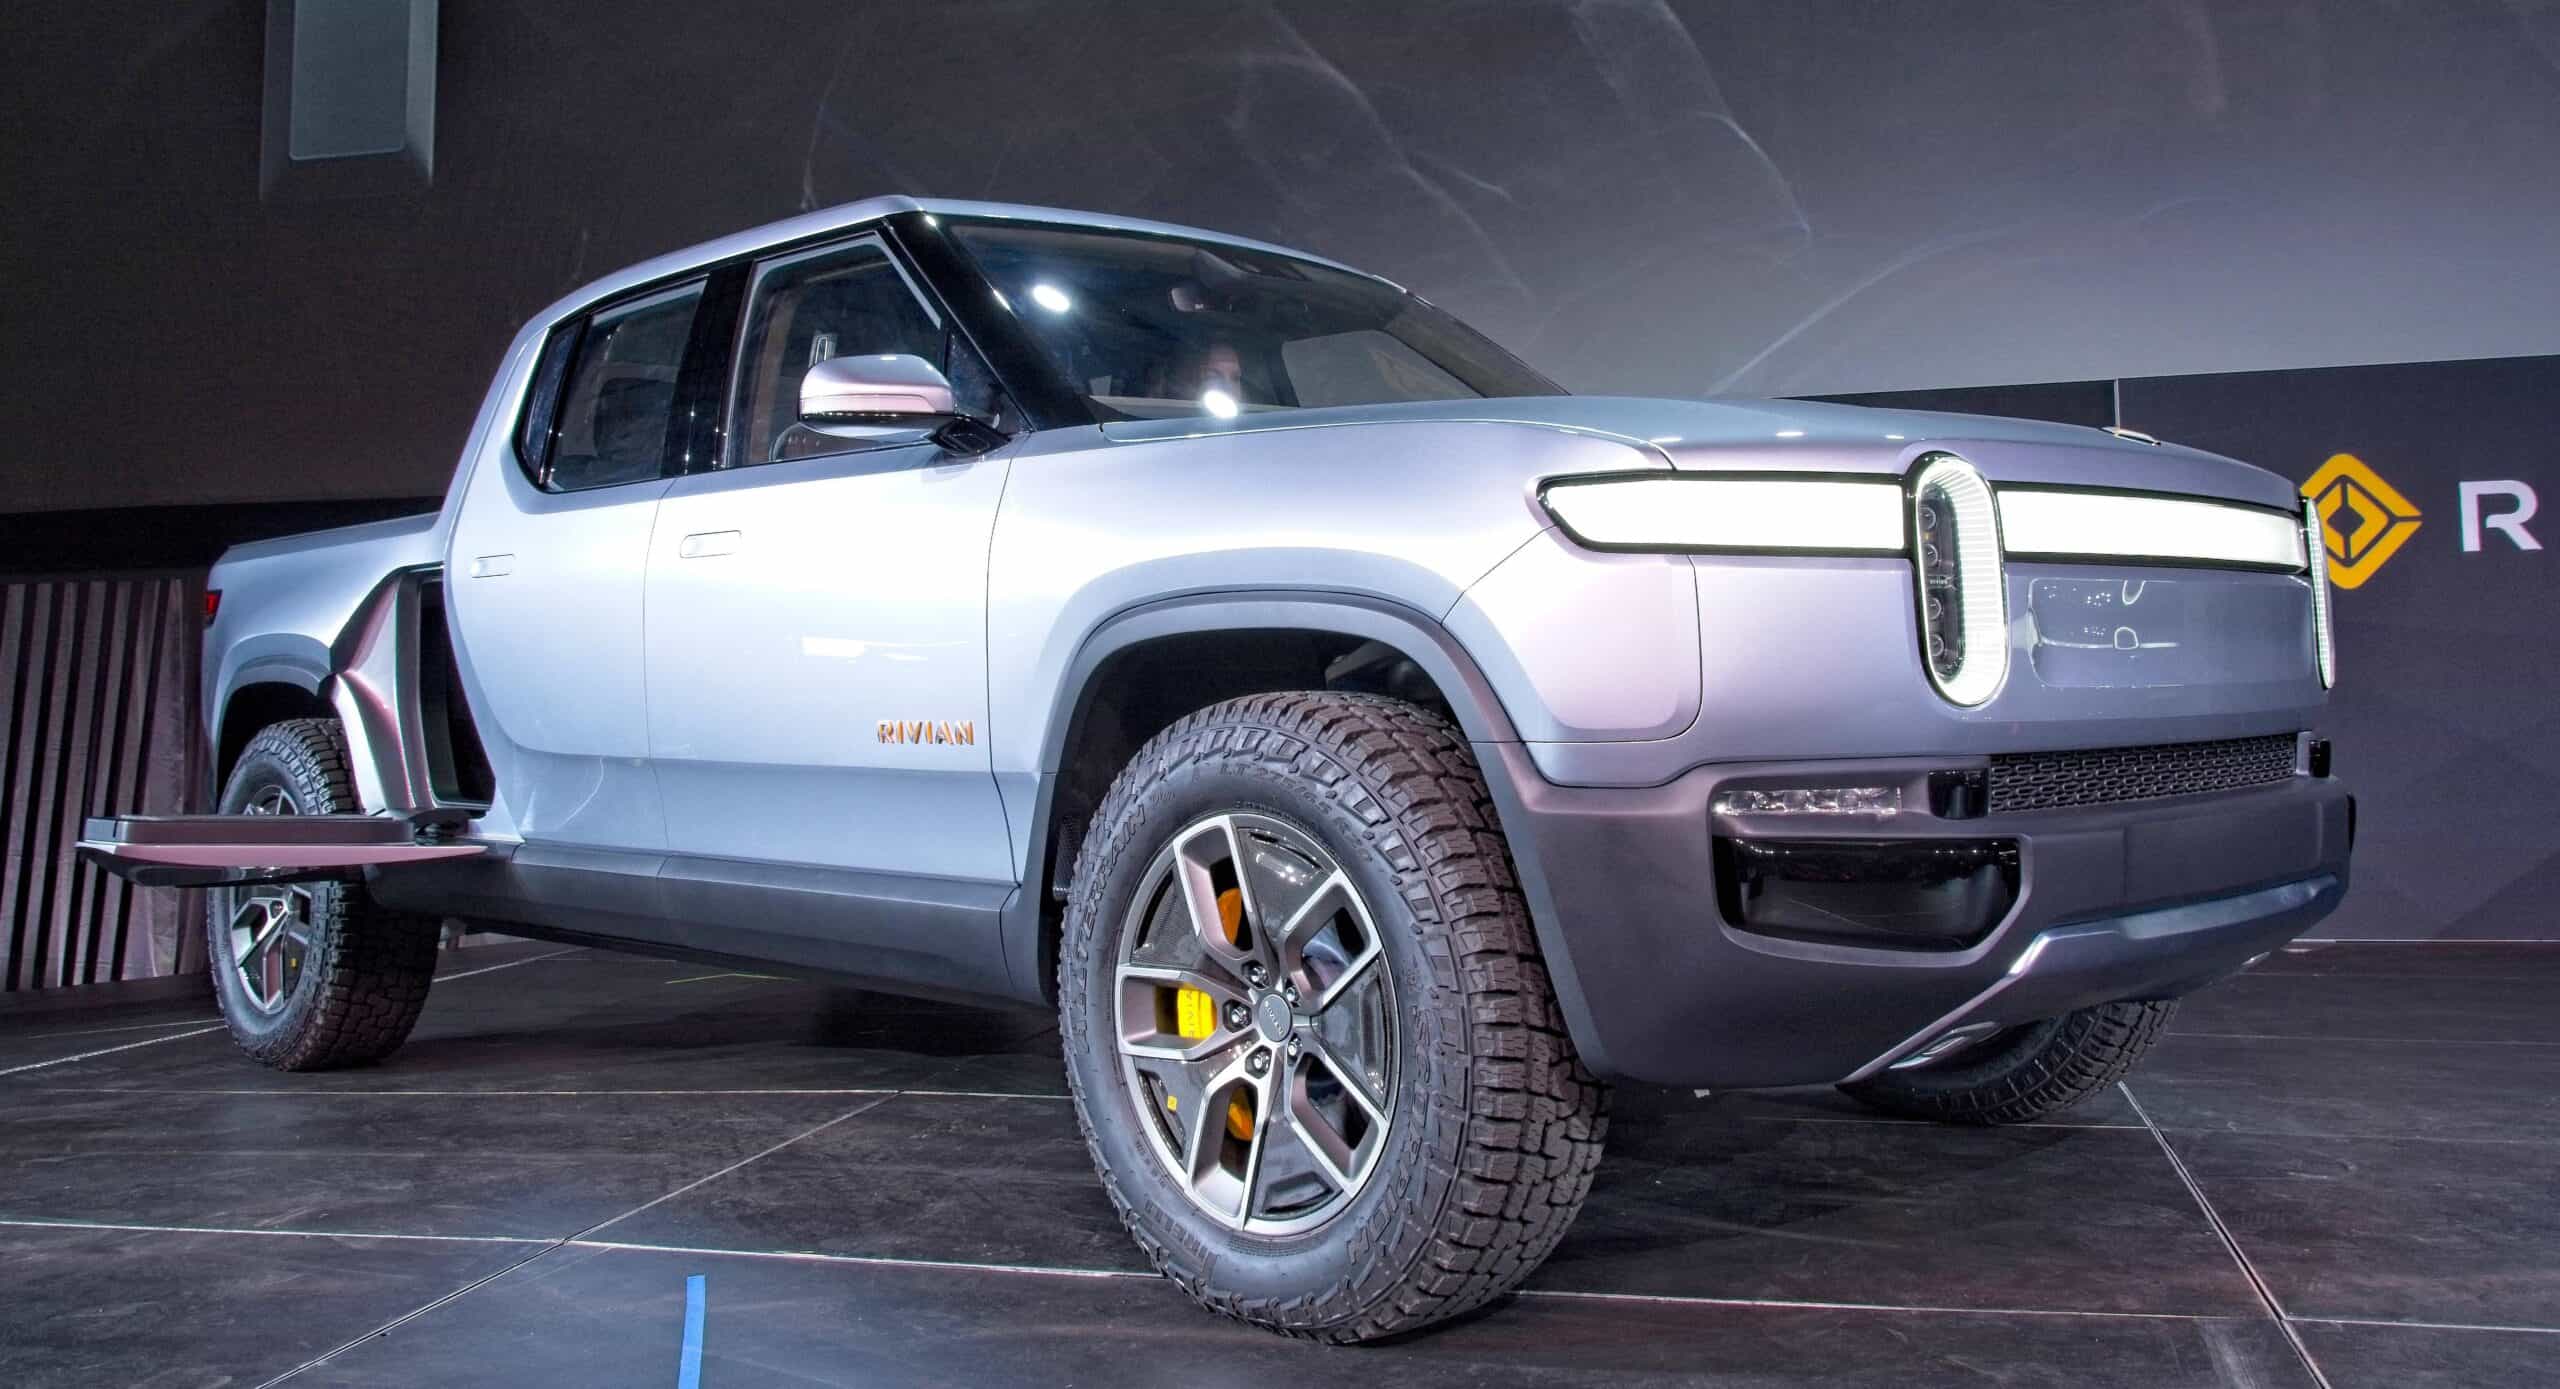 Rivian+R1T | Debut of the Rivian R1T pickup at the 2018 Los Angeles Auto Show, November 27, 2018